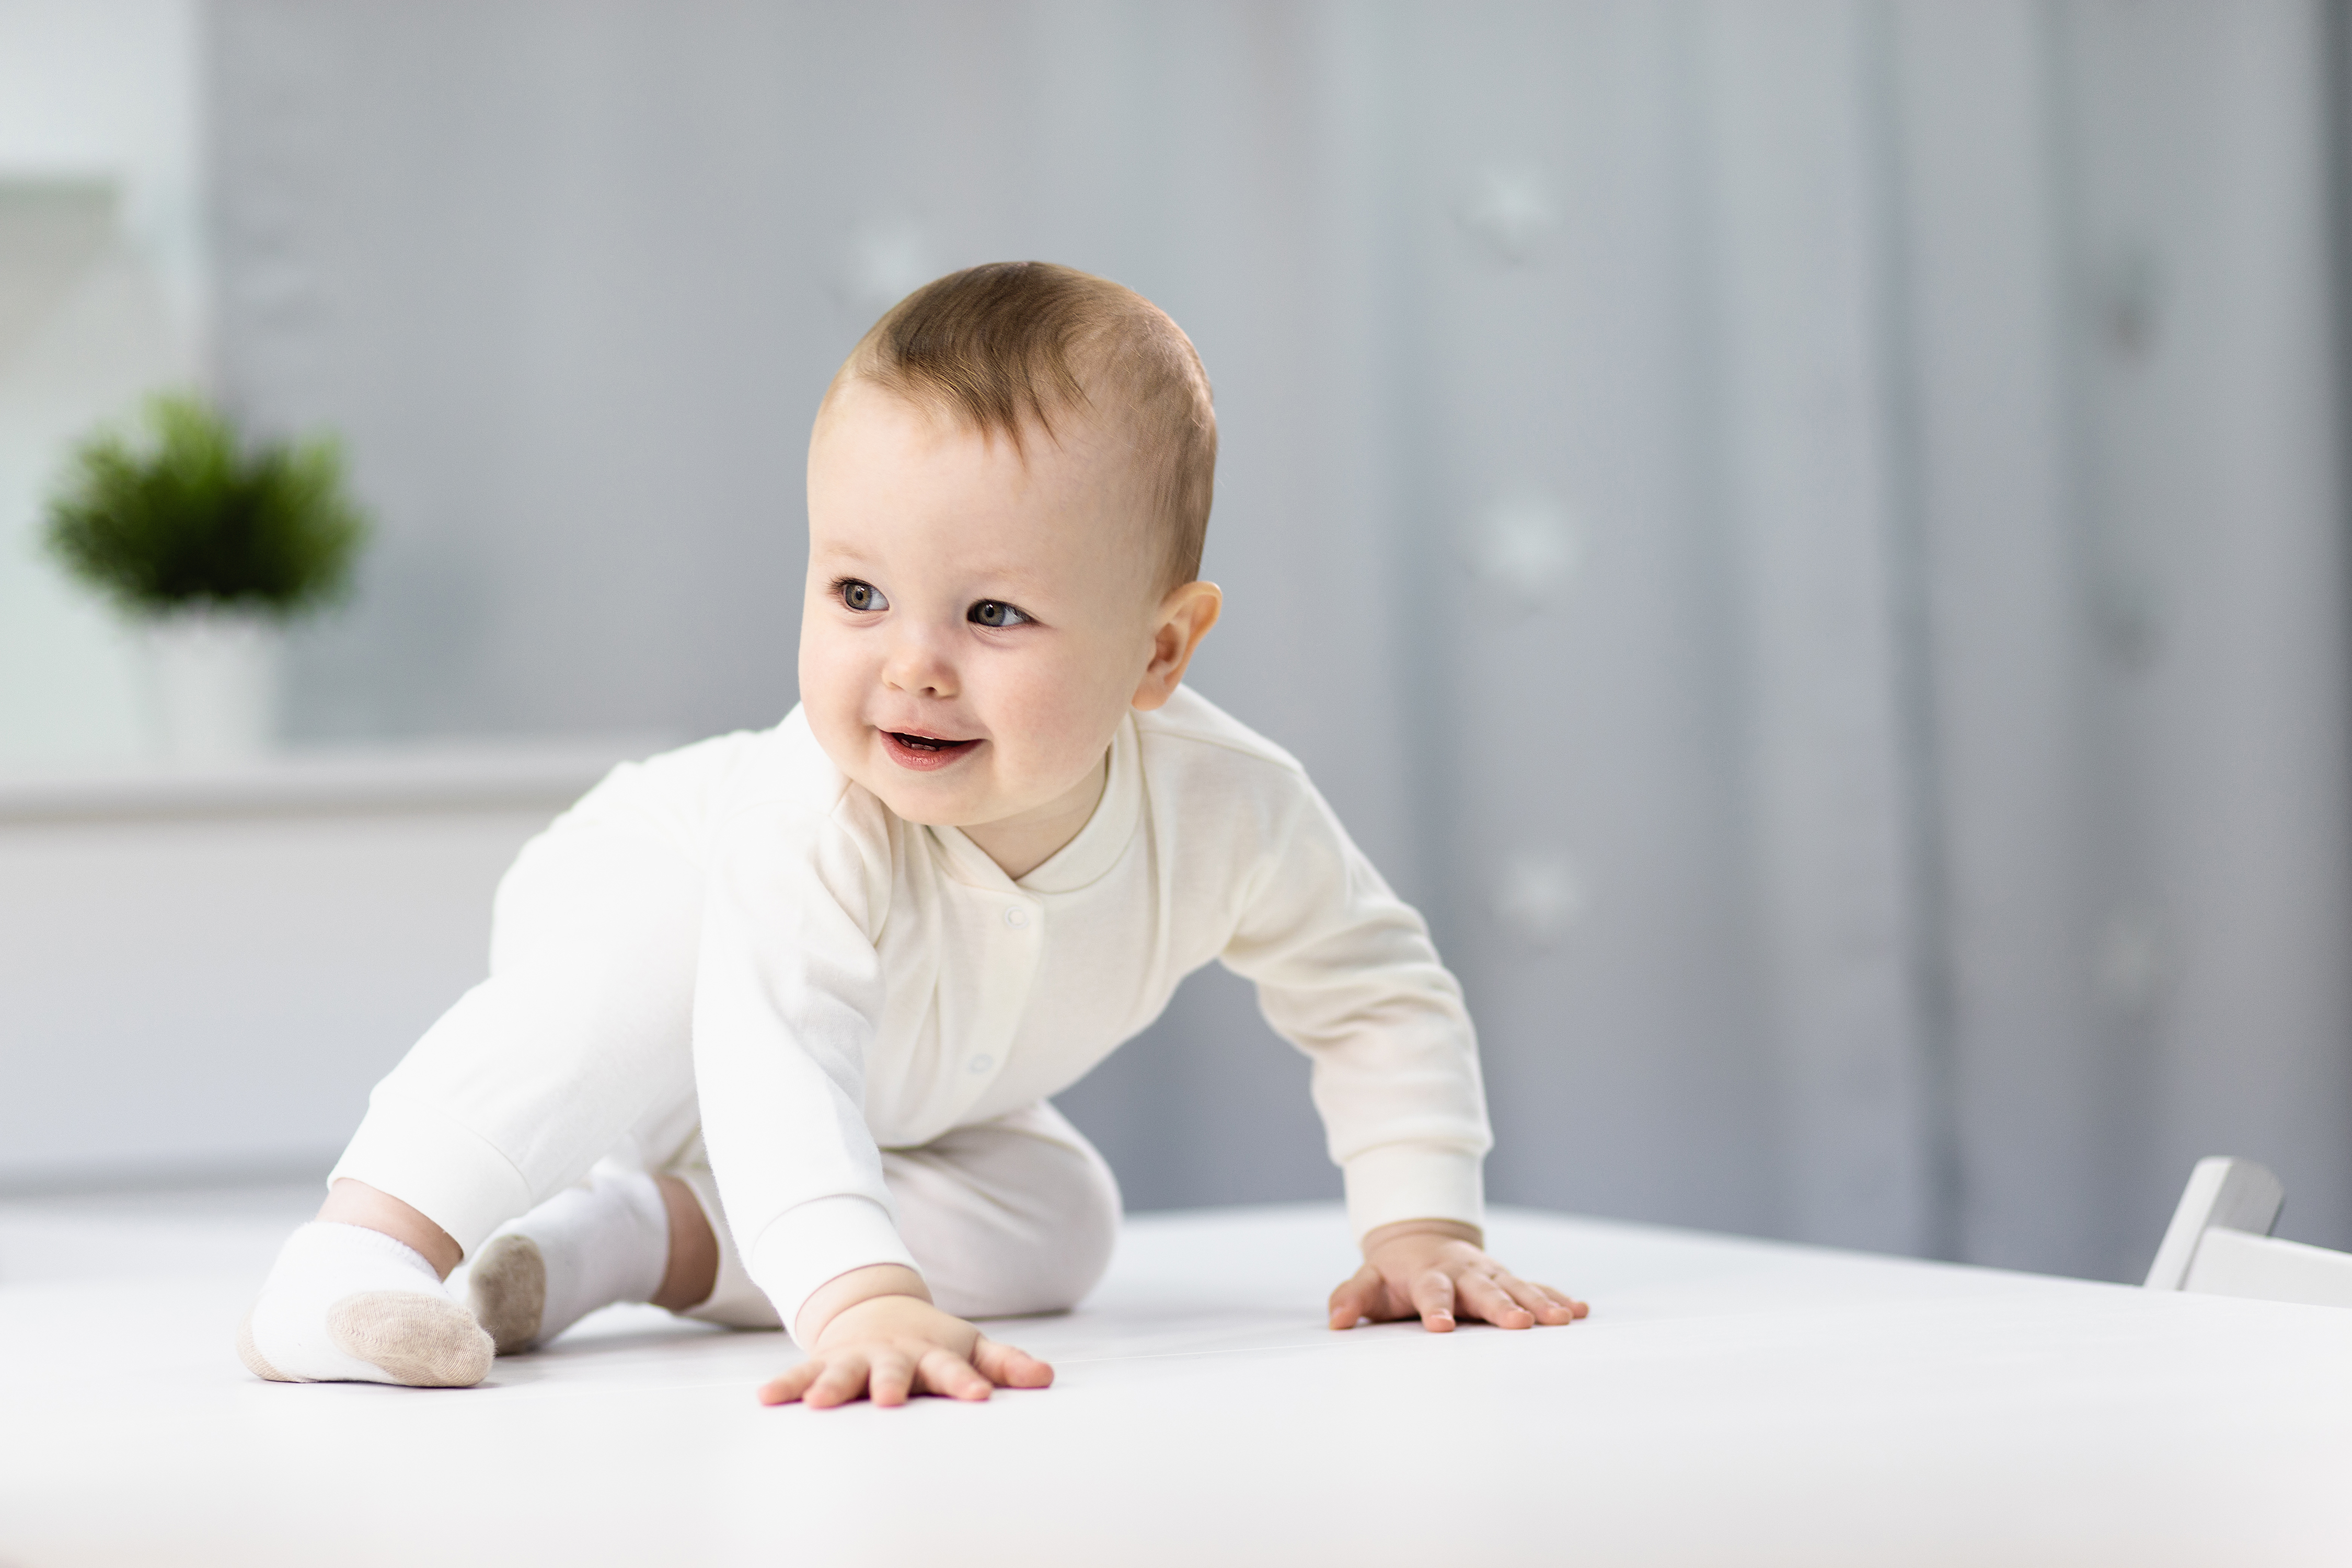 naked-baby-white-suit-sitting-bright-room.jpg